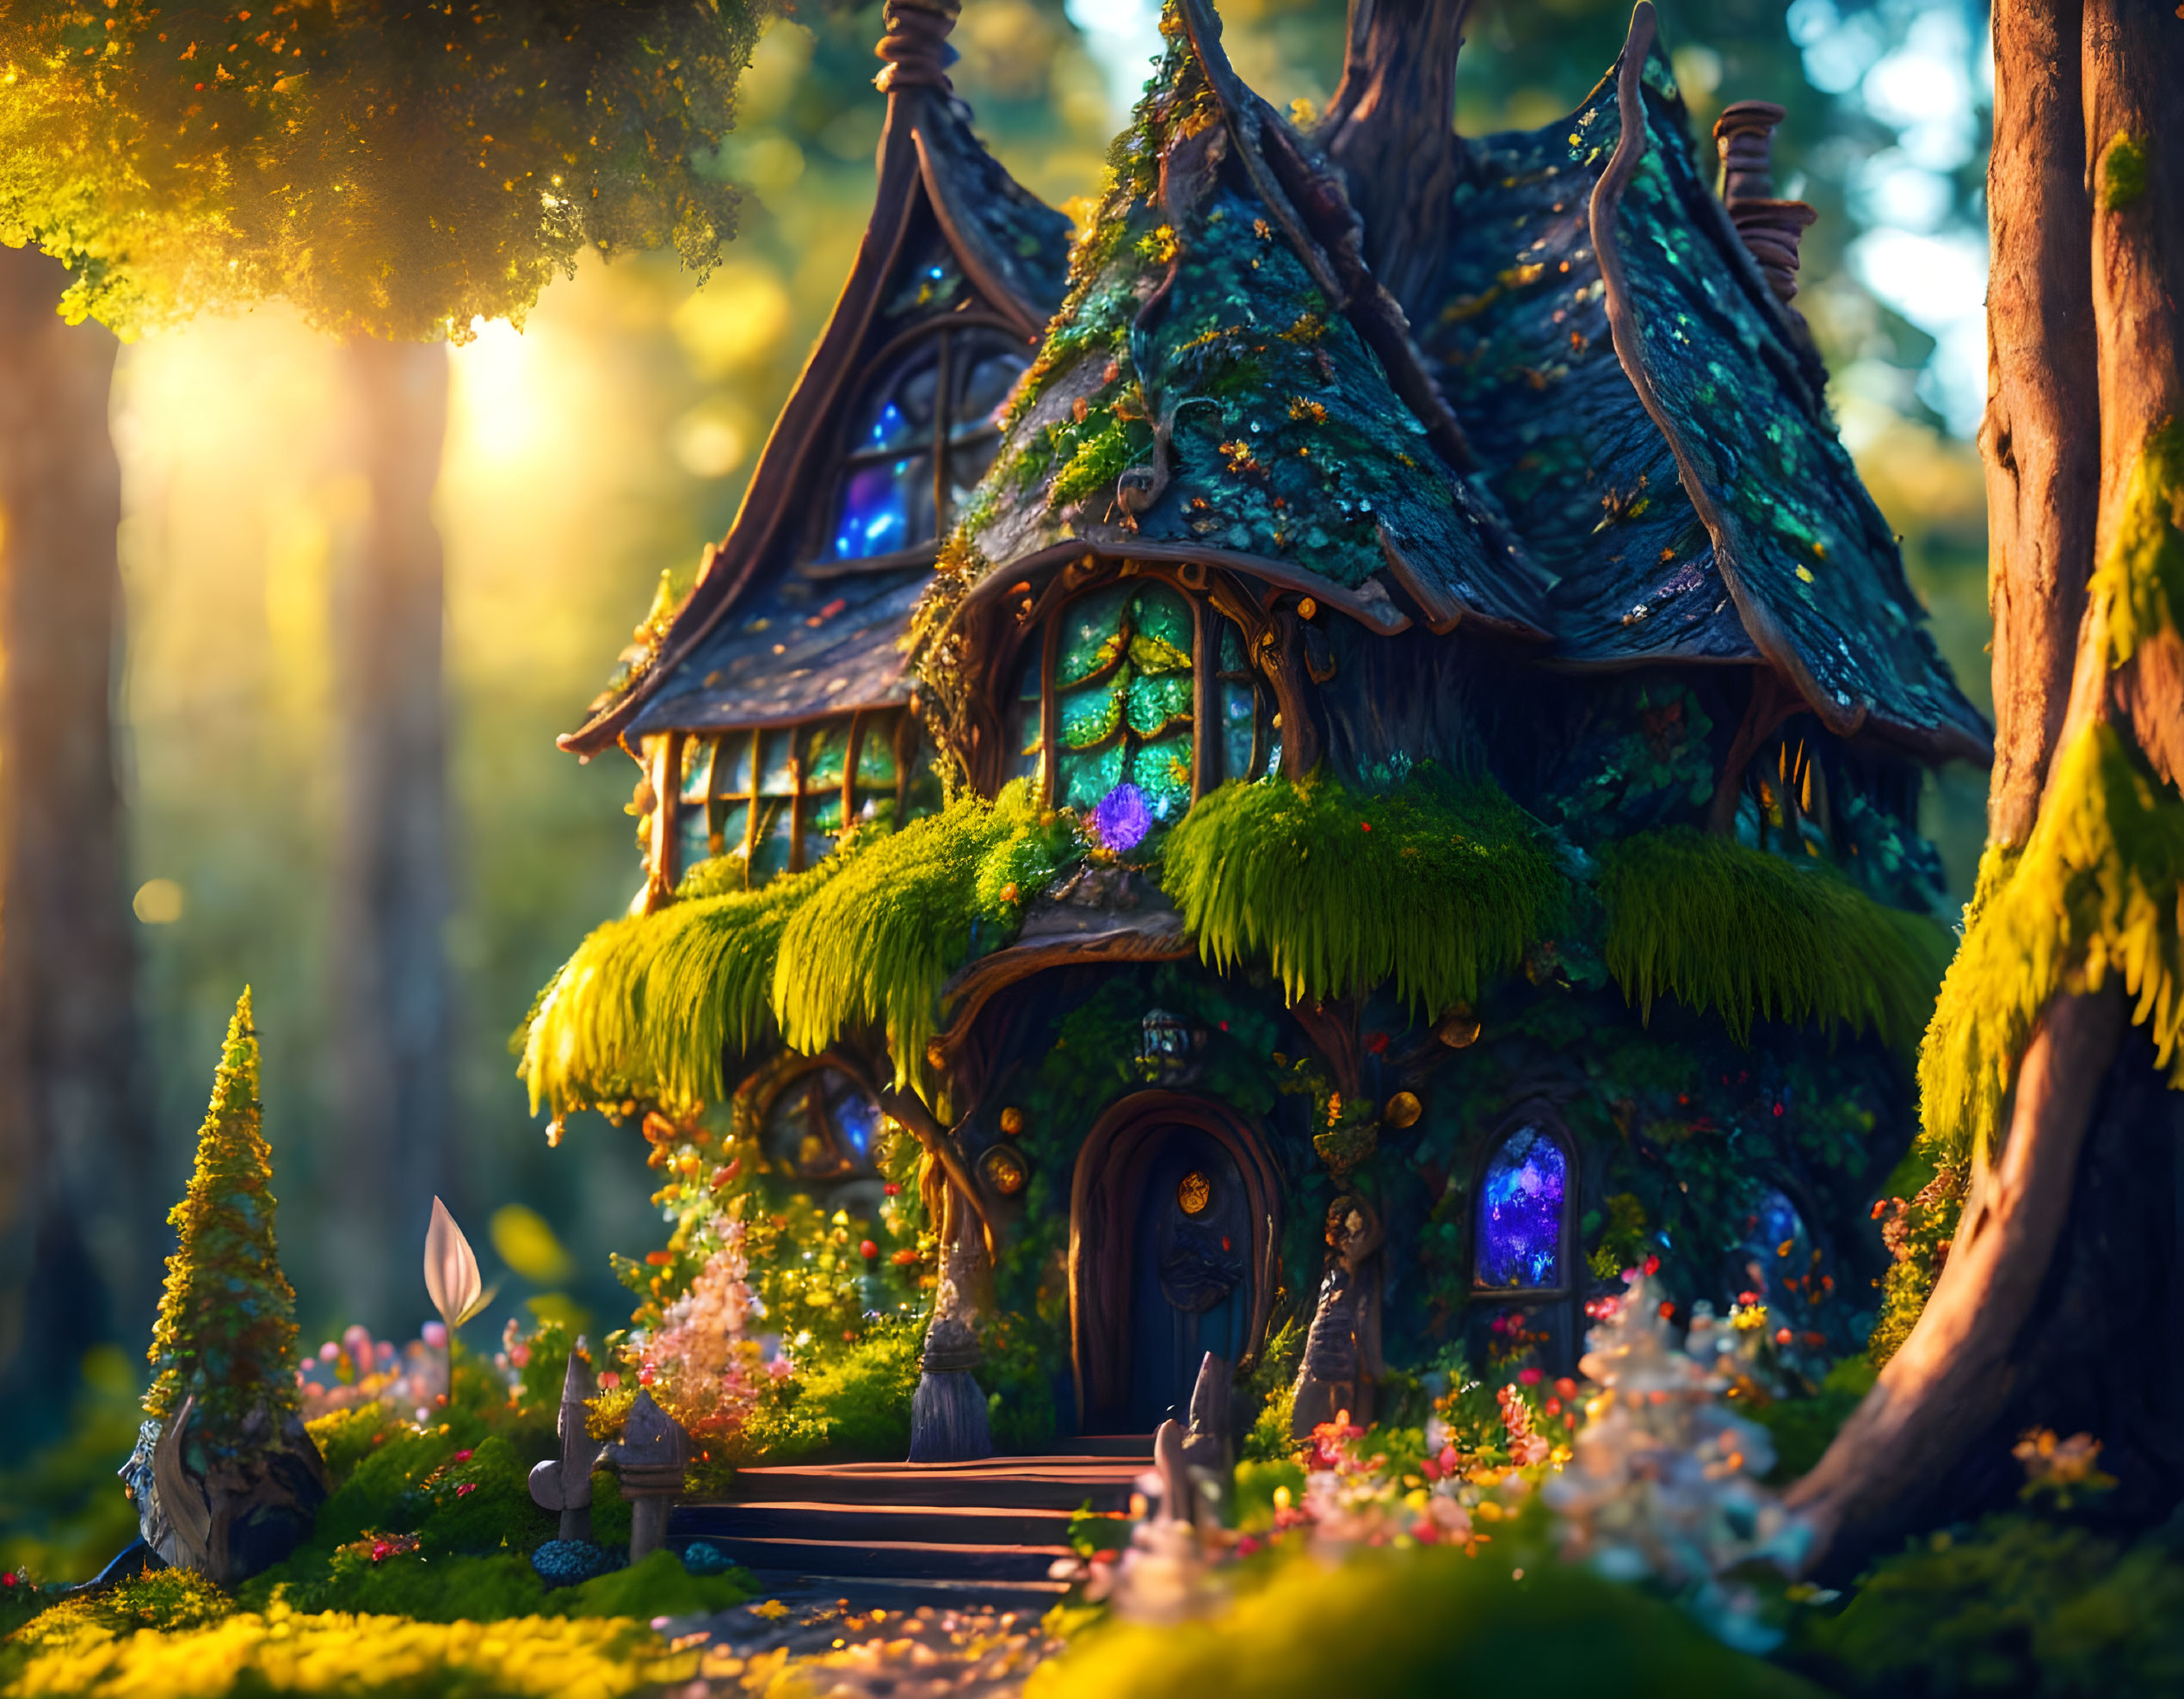 Enchanting forest cottage with mossy roofs and glowing windows nestled in a magical sunlit setting